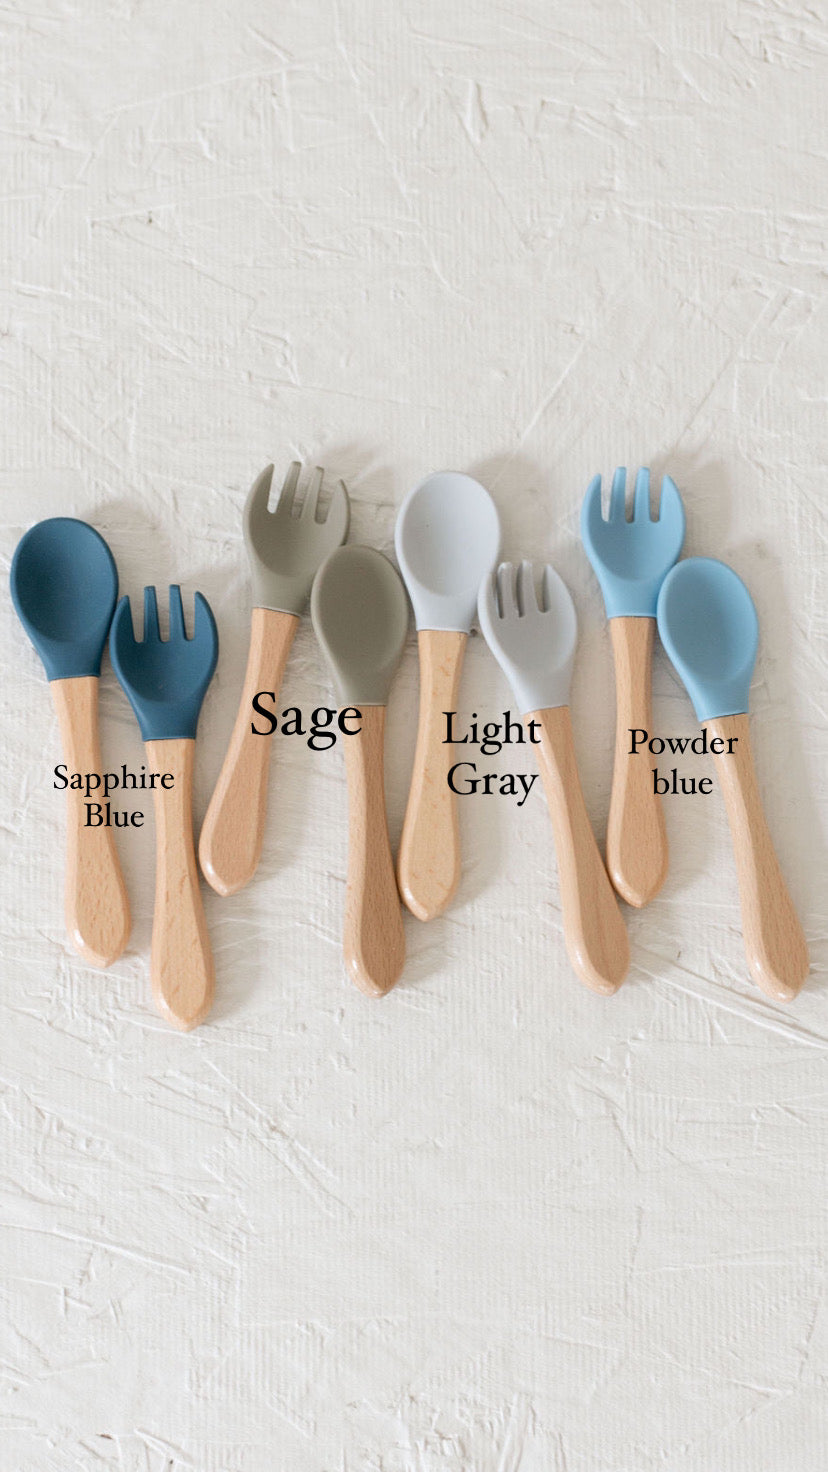 Silicone Spoon & Fork Sets